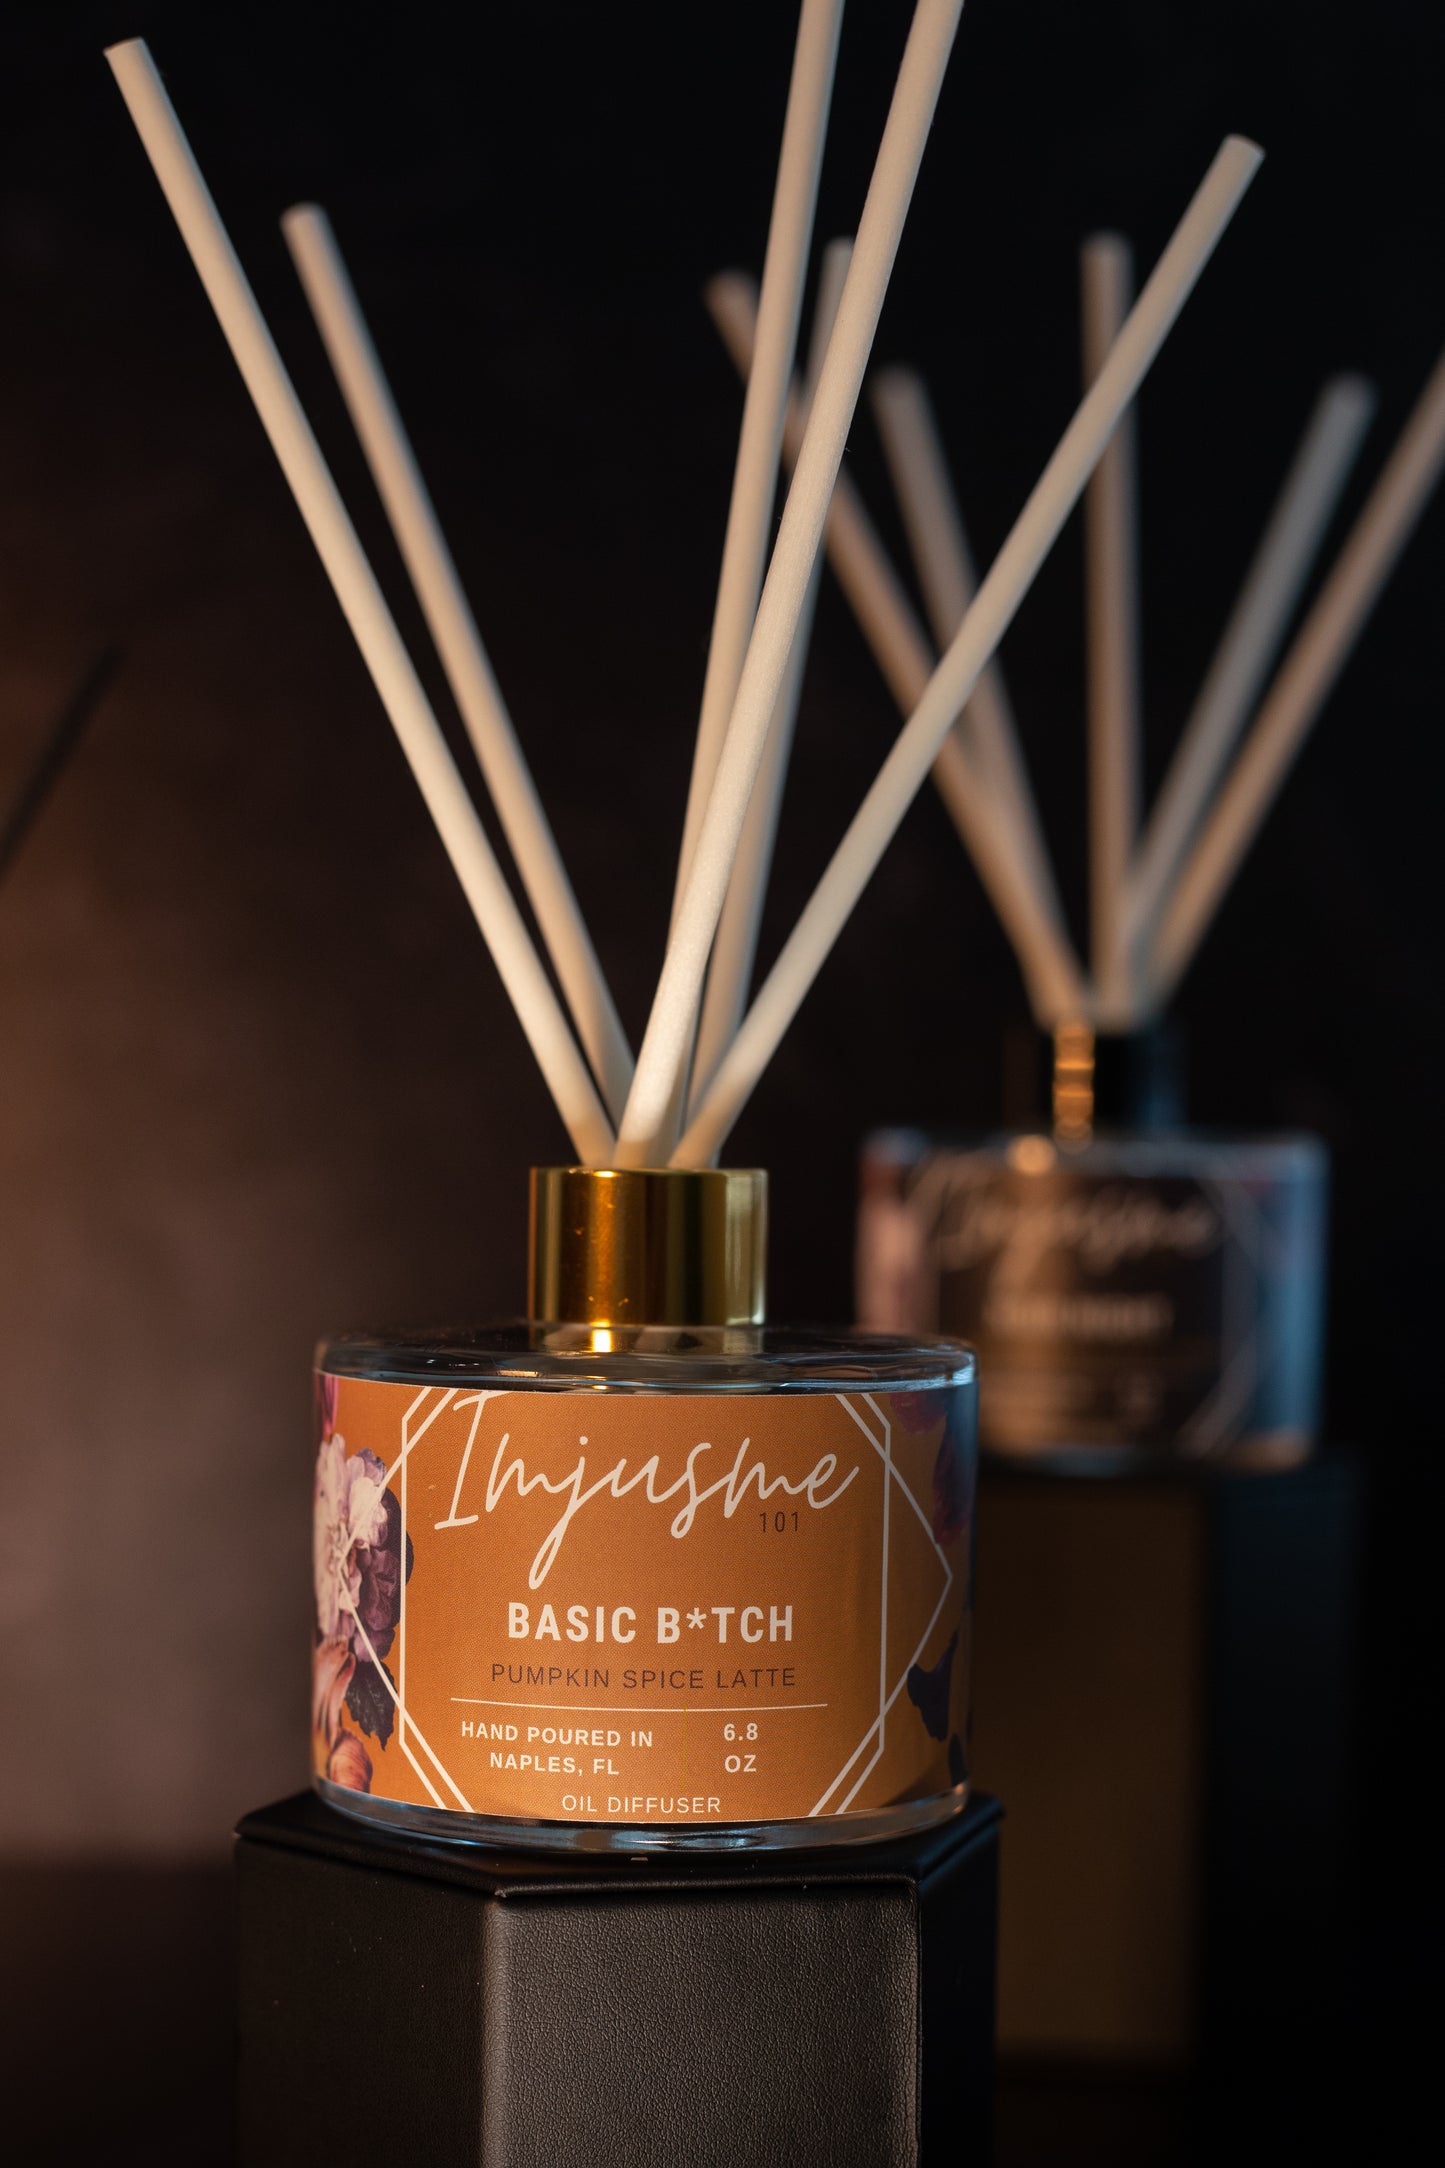 Basic Reed Diffuser